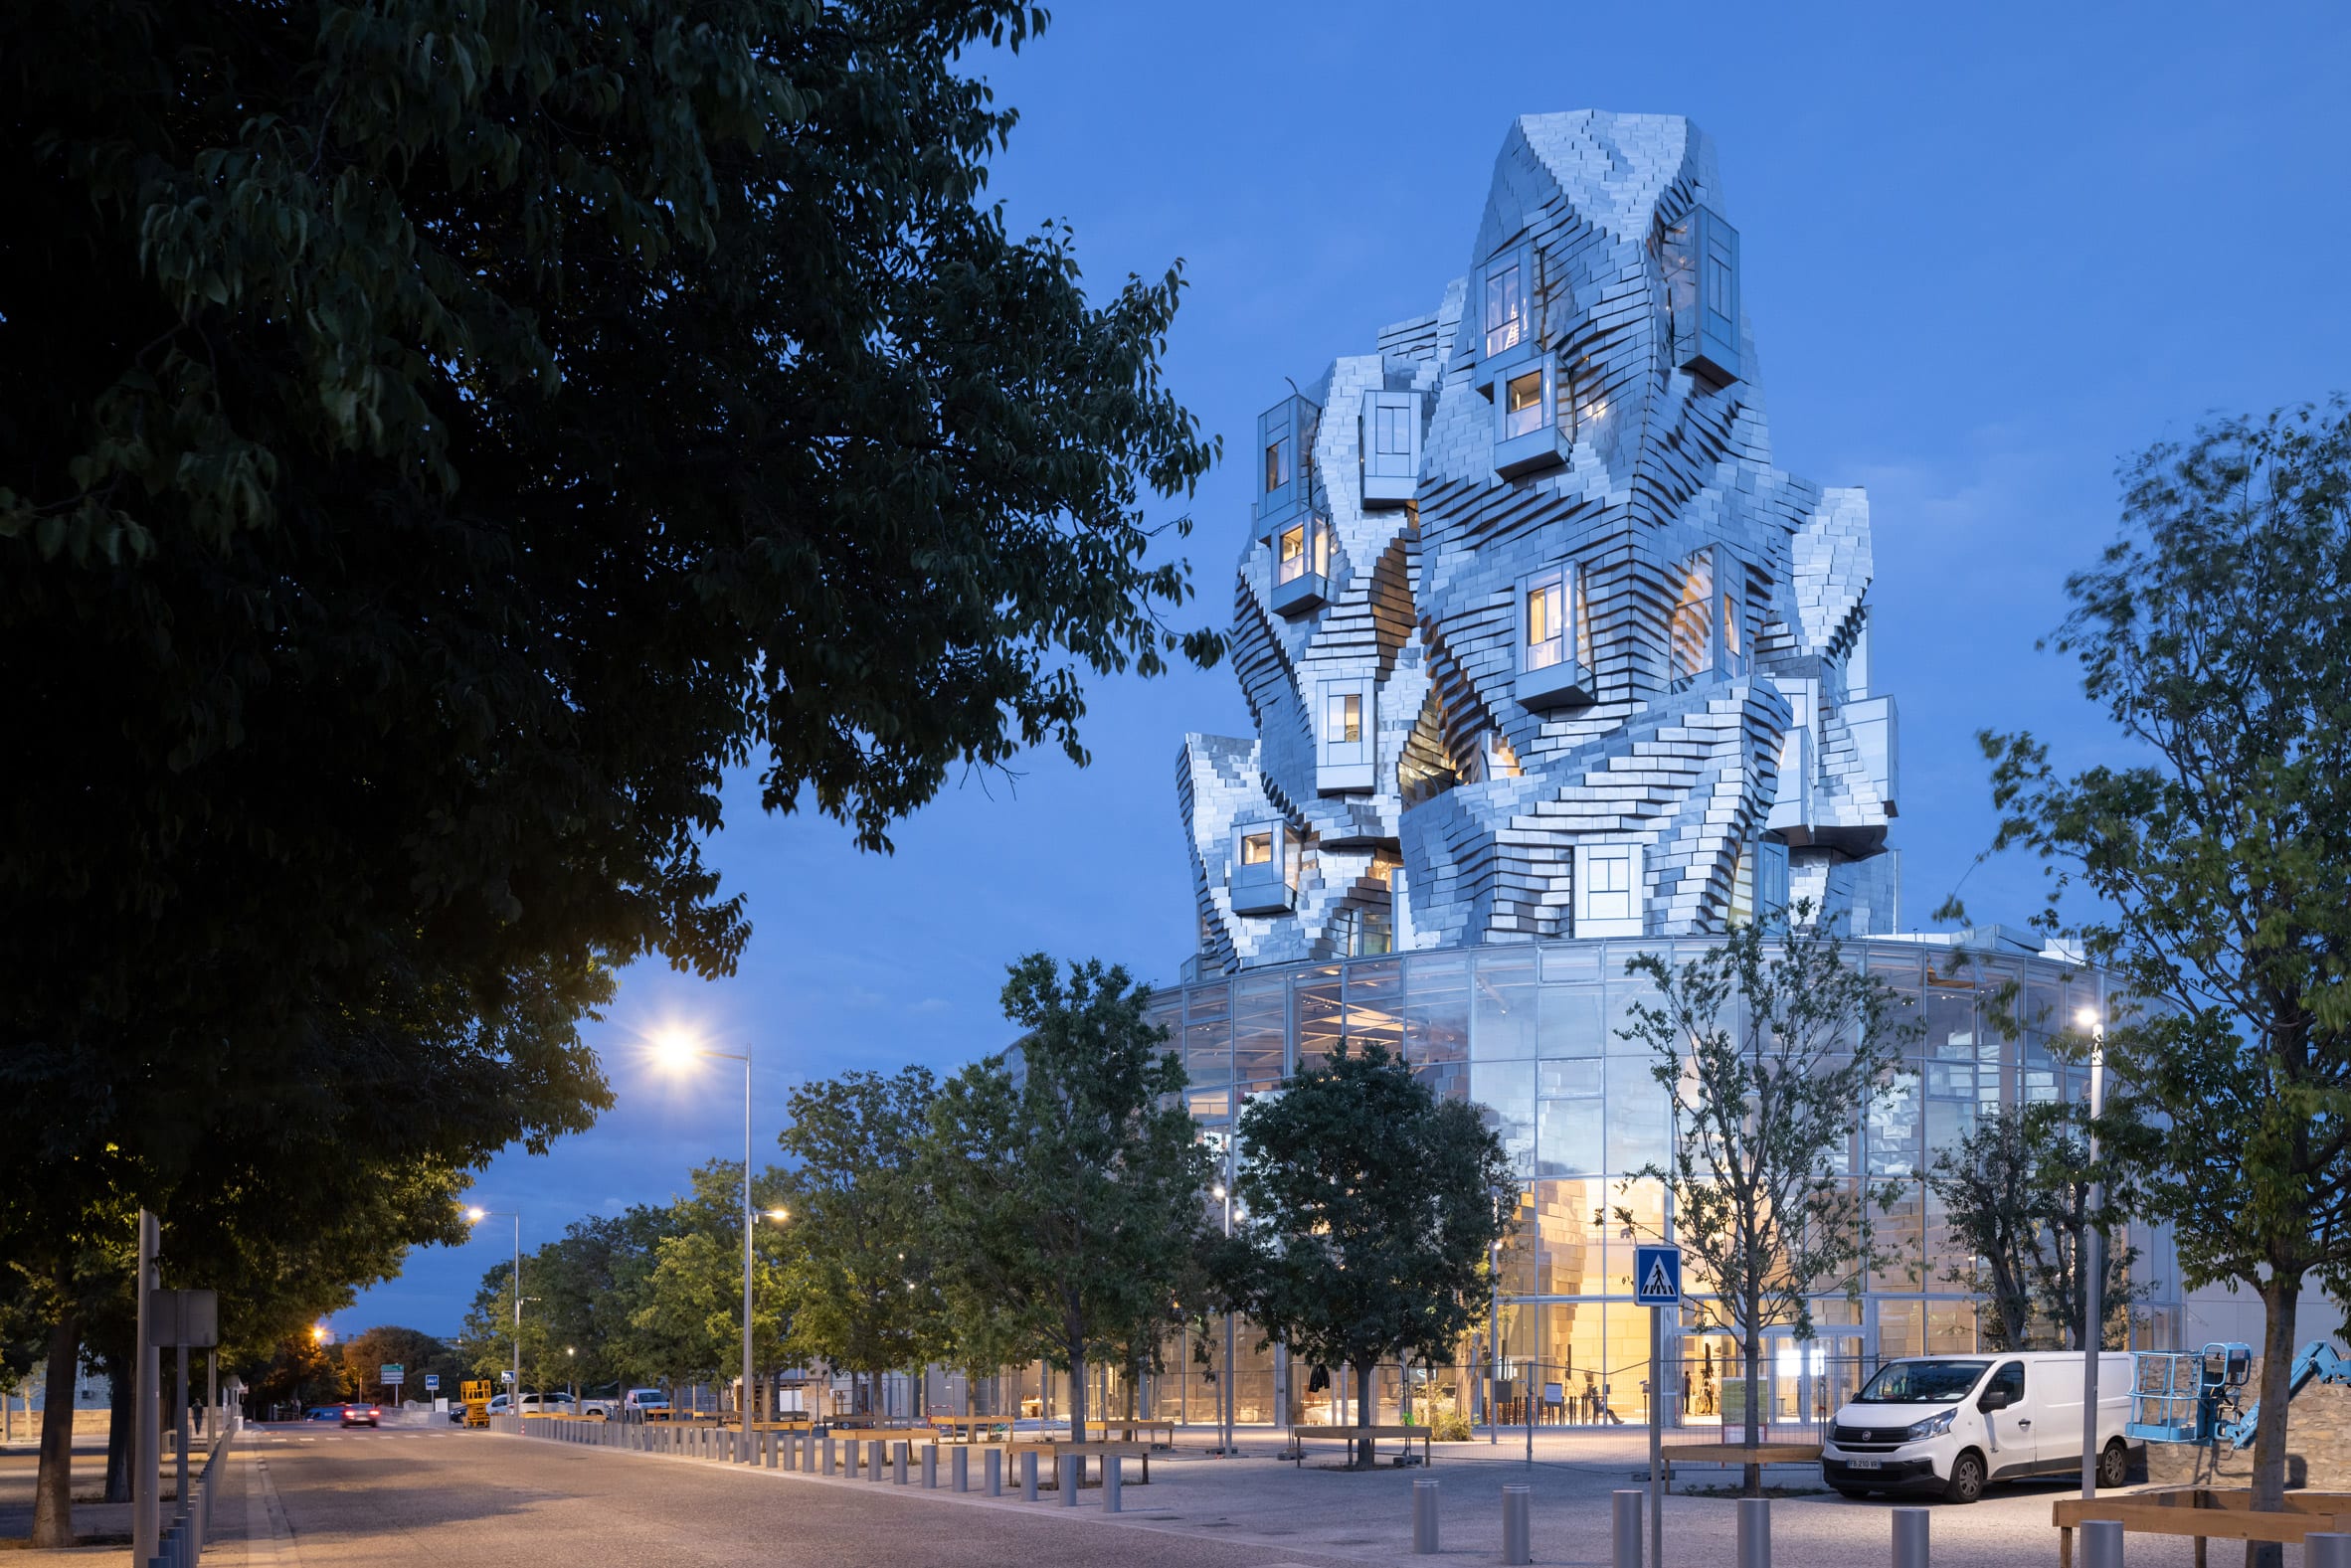 Frank Gehry's Fondation Louis Vuitton shows he doesn't know when to stop, Architecture